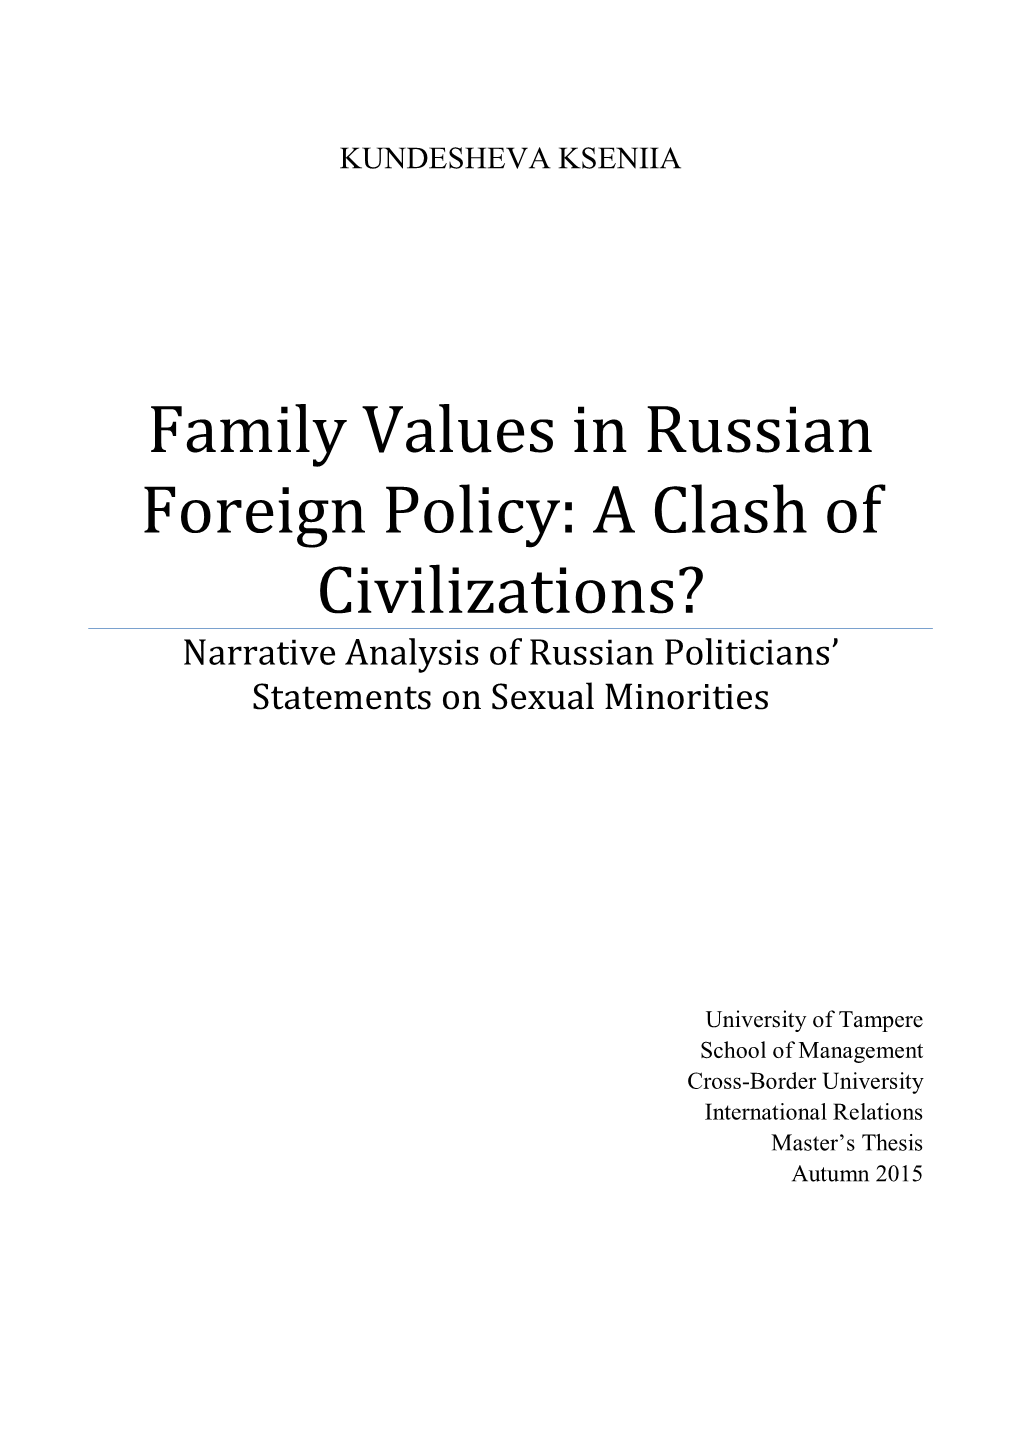 Family Values in Russian Foreign Policy: a Clash of Civilizations? Narrative Analysis of Russian Politicians’ Statements on Sexual Minorities